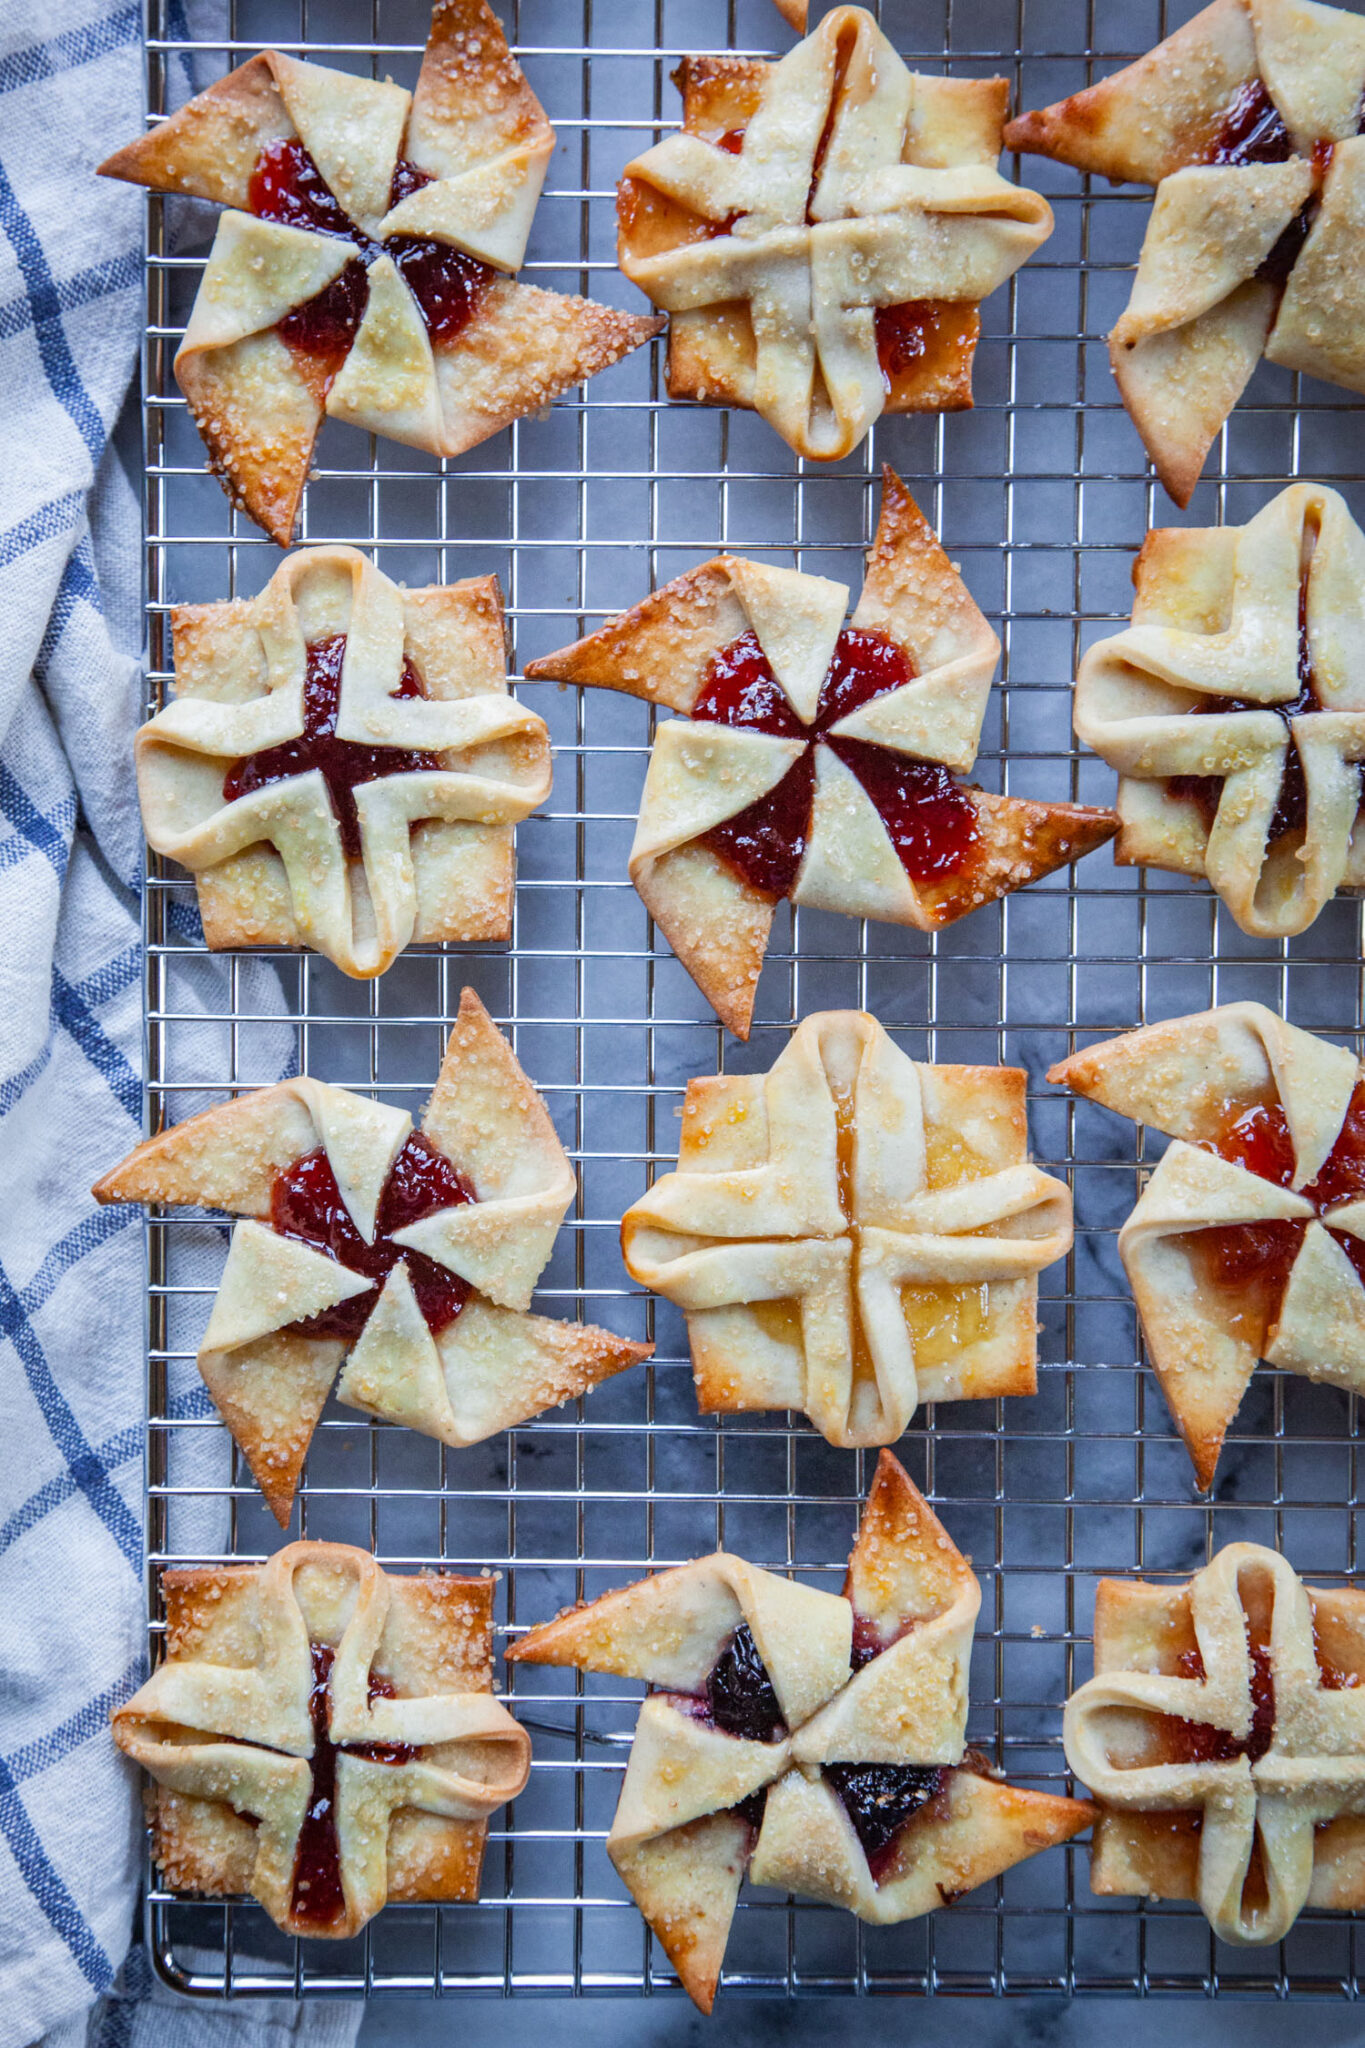 Finnish Christmas Cookies, called Joulutorttu, on a wire rack with a cloth napkin next to them. The cookies are jam filled pastries that are formed to look like a square flower and in a pinwheel shape.